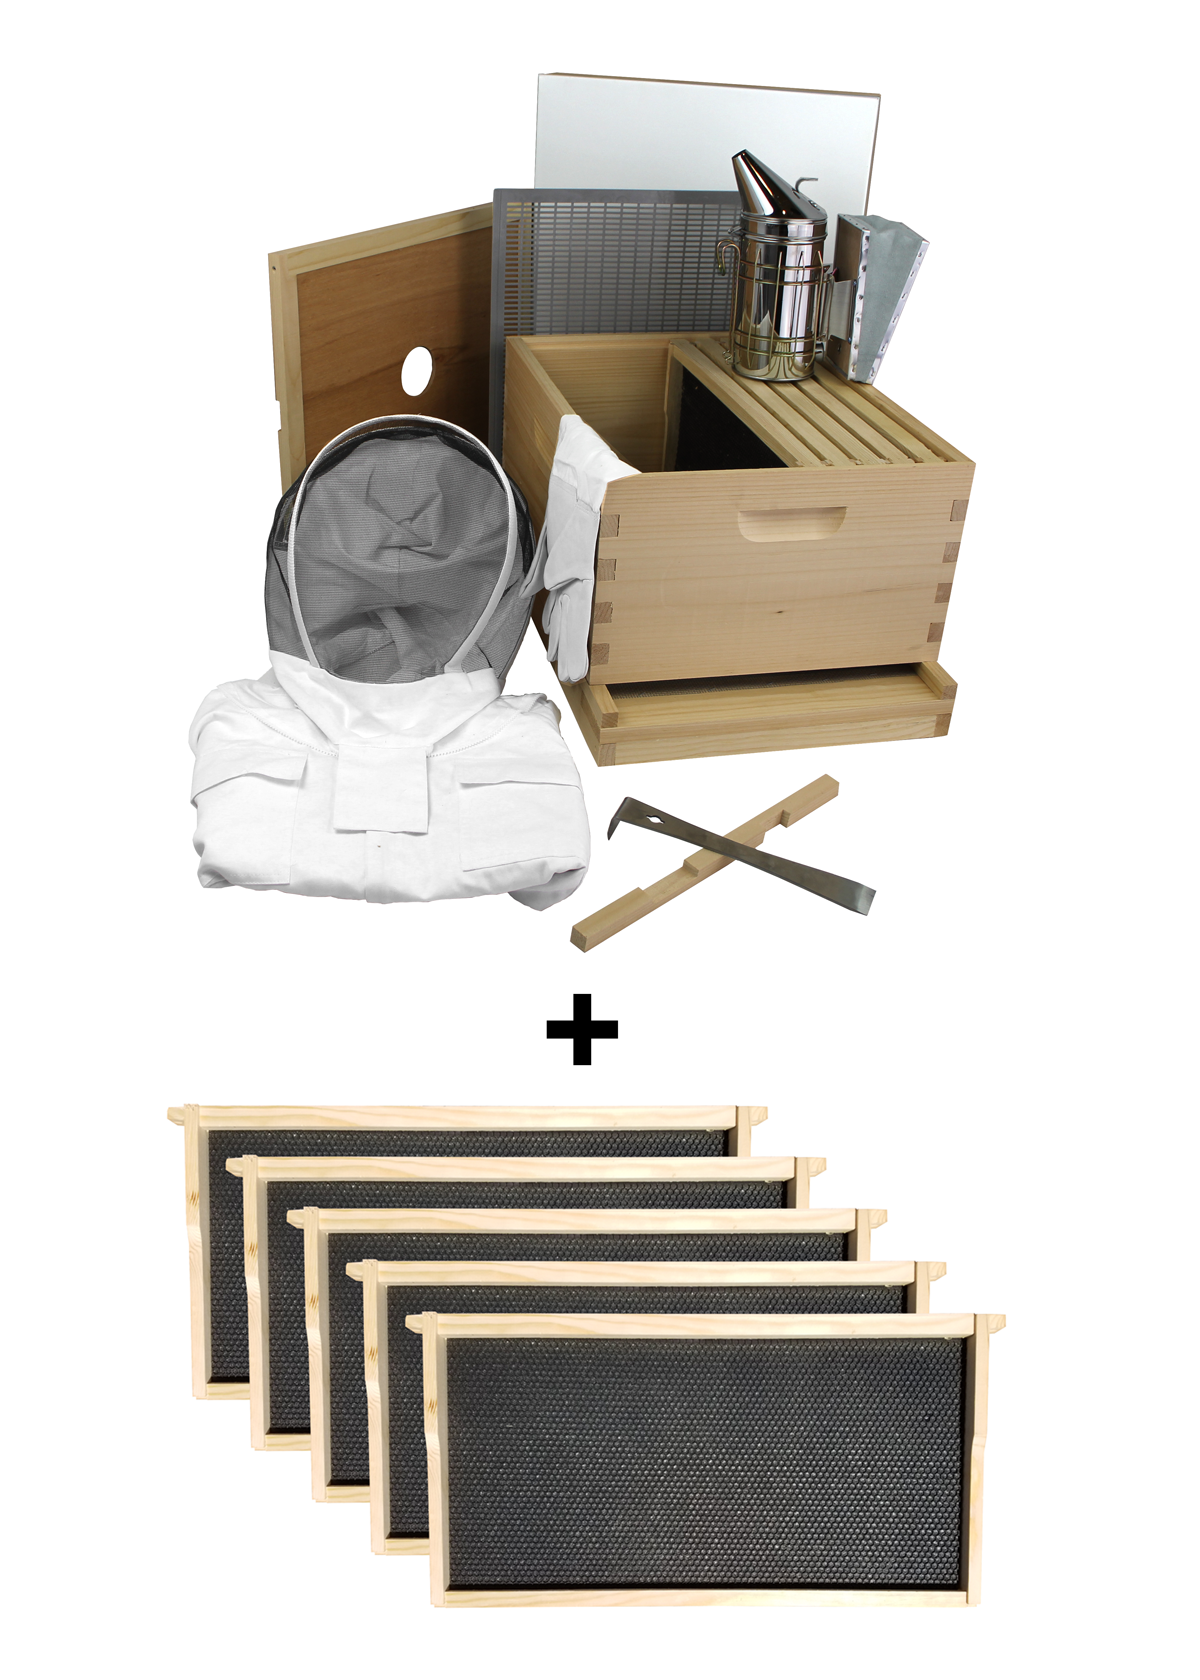 Busy Bees 'N' More Amish Made 10 Frame Beehive Starter Kit With 1 Deep Bee Box & Accessories Starter Kit With 5 More Frames